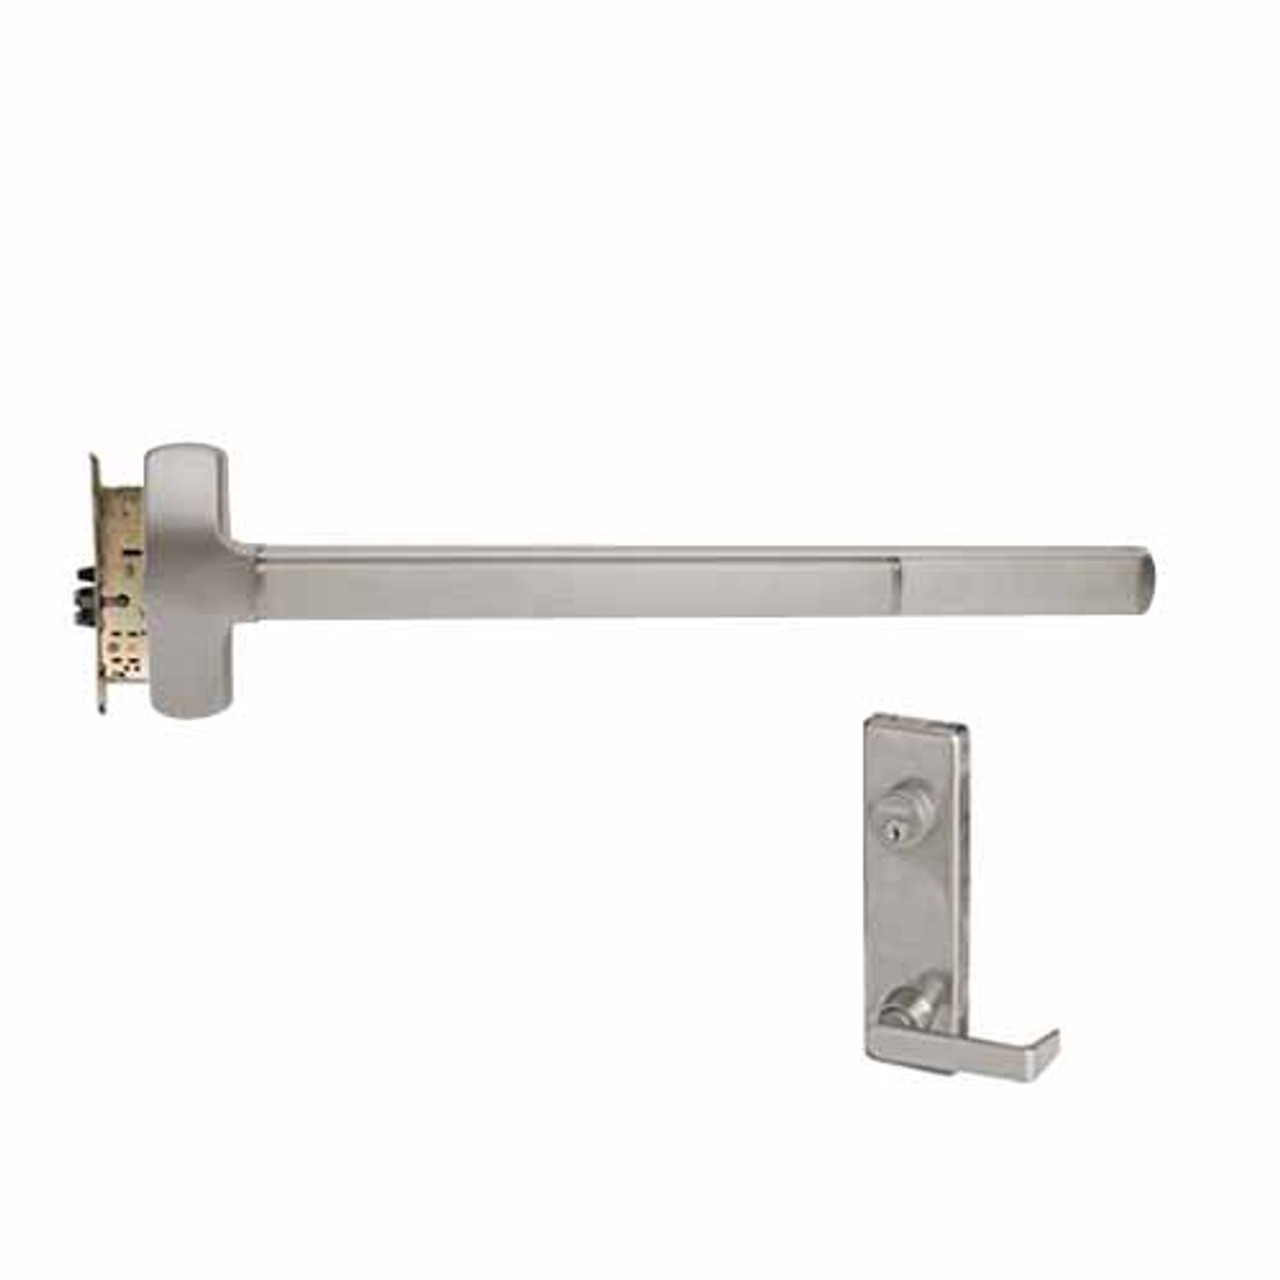 F-25-M-L-Dane-US32D-4-RHR Falcon Exit Device in Satin Stainless Steel